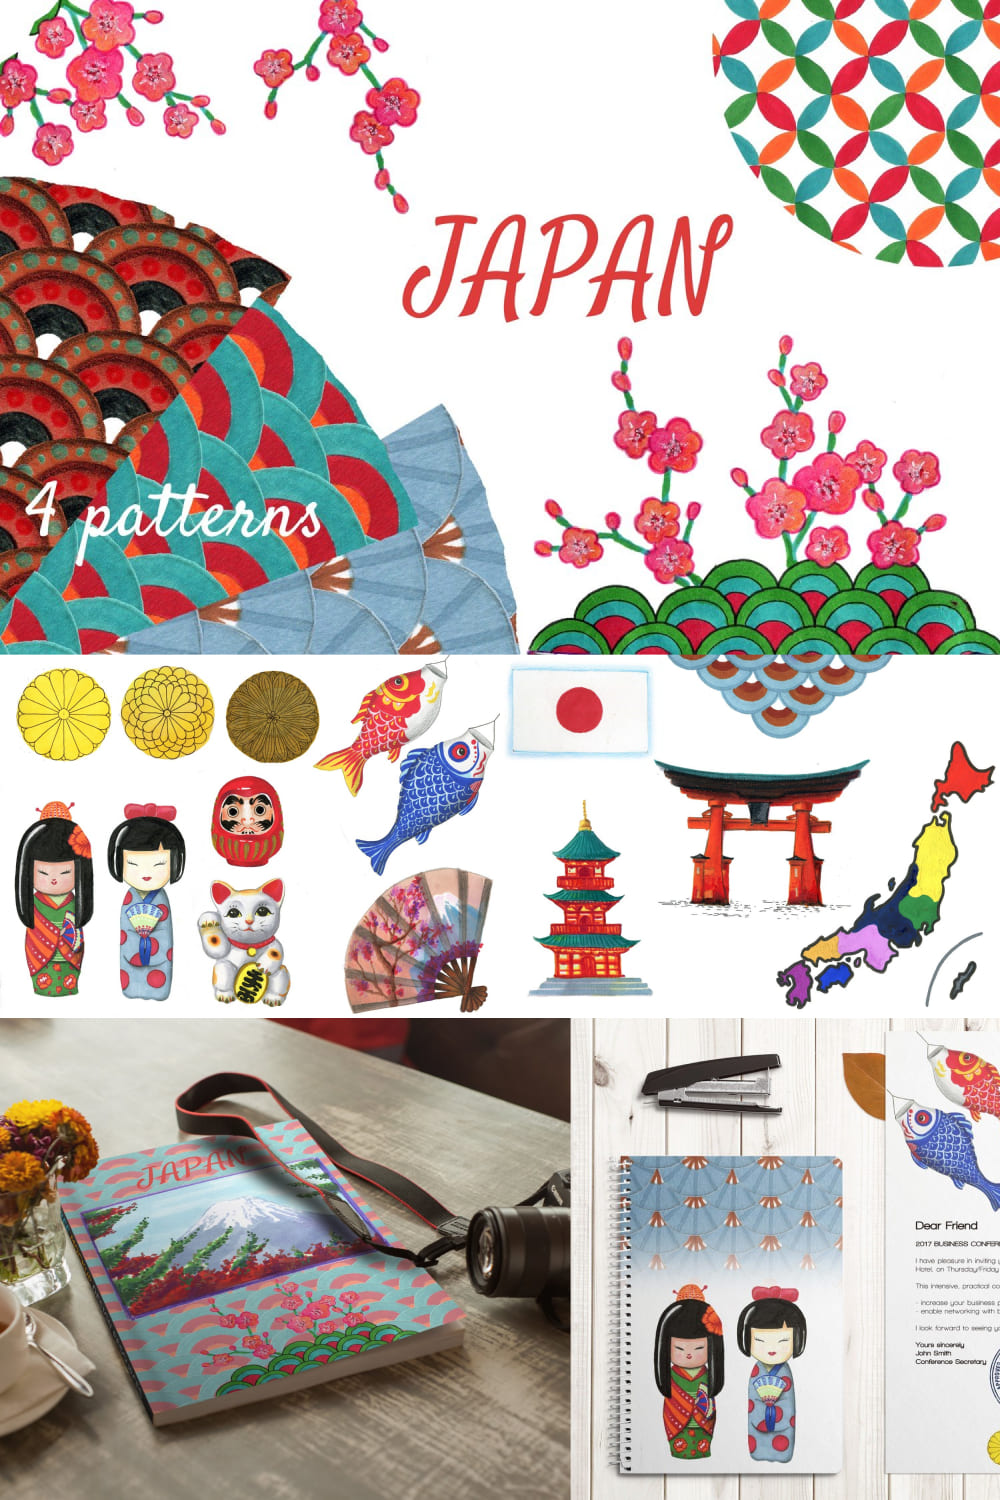 Japan and its main symbols - pinterest image preview.